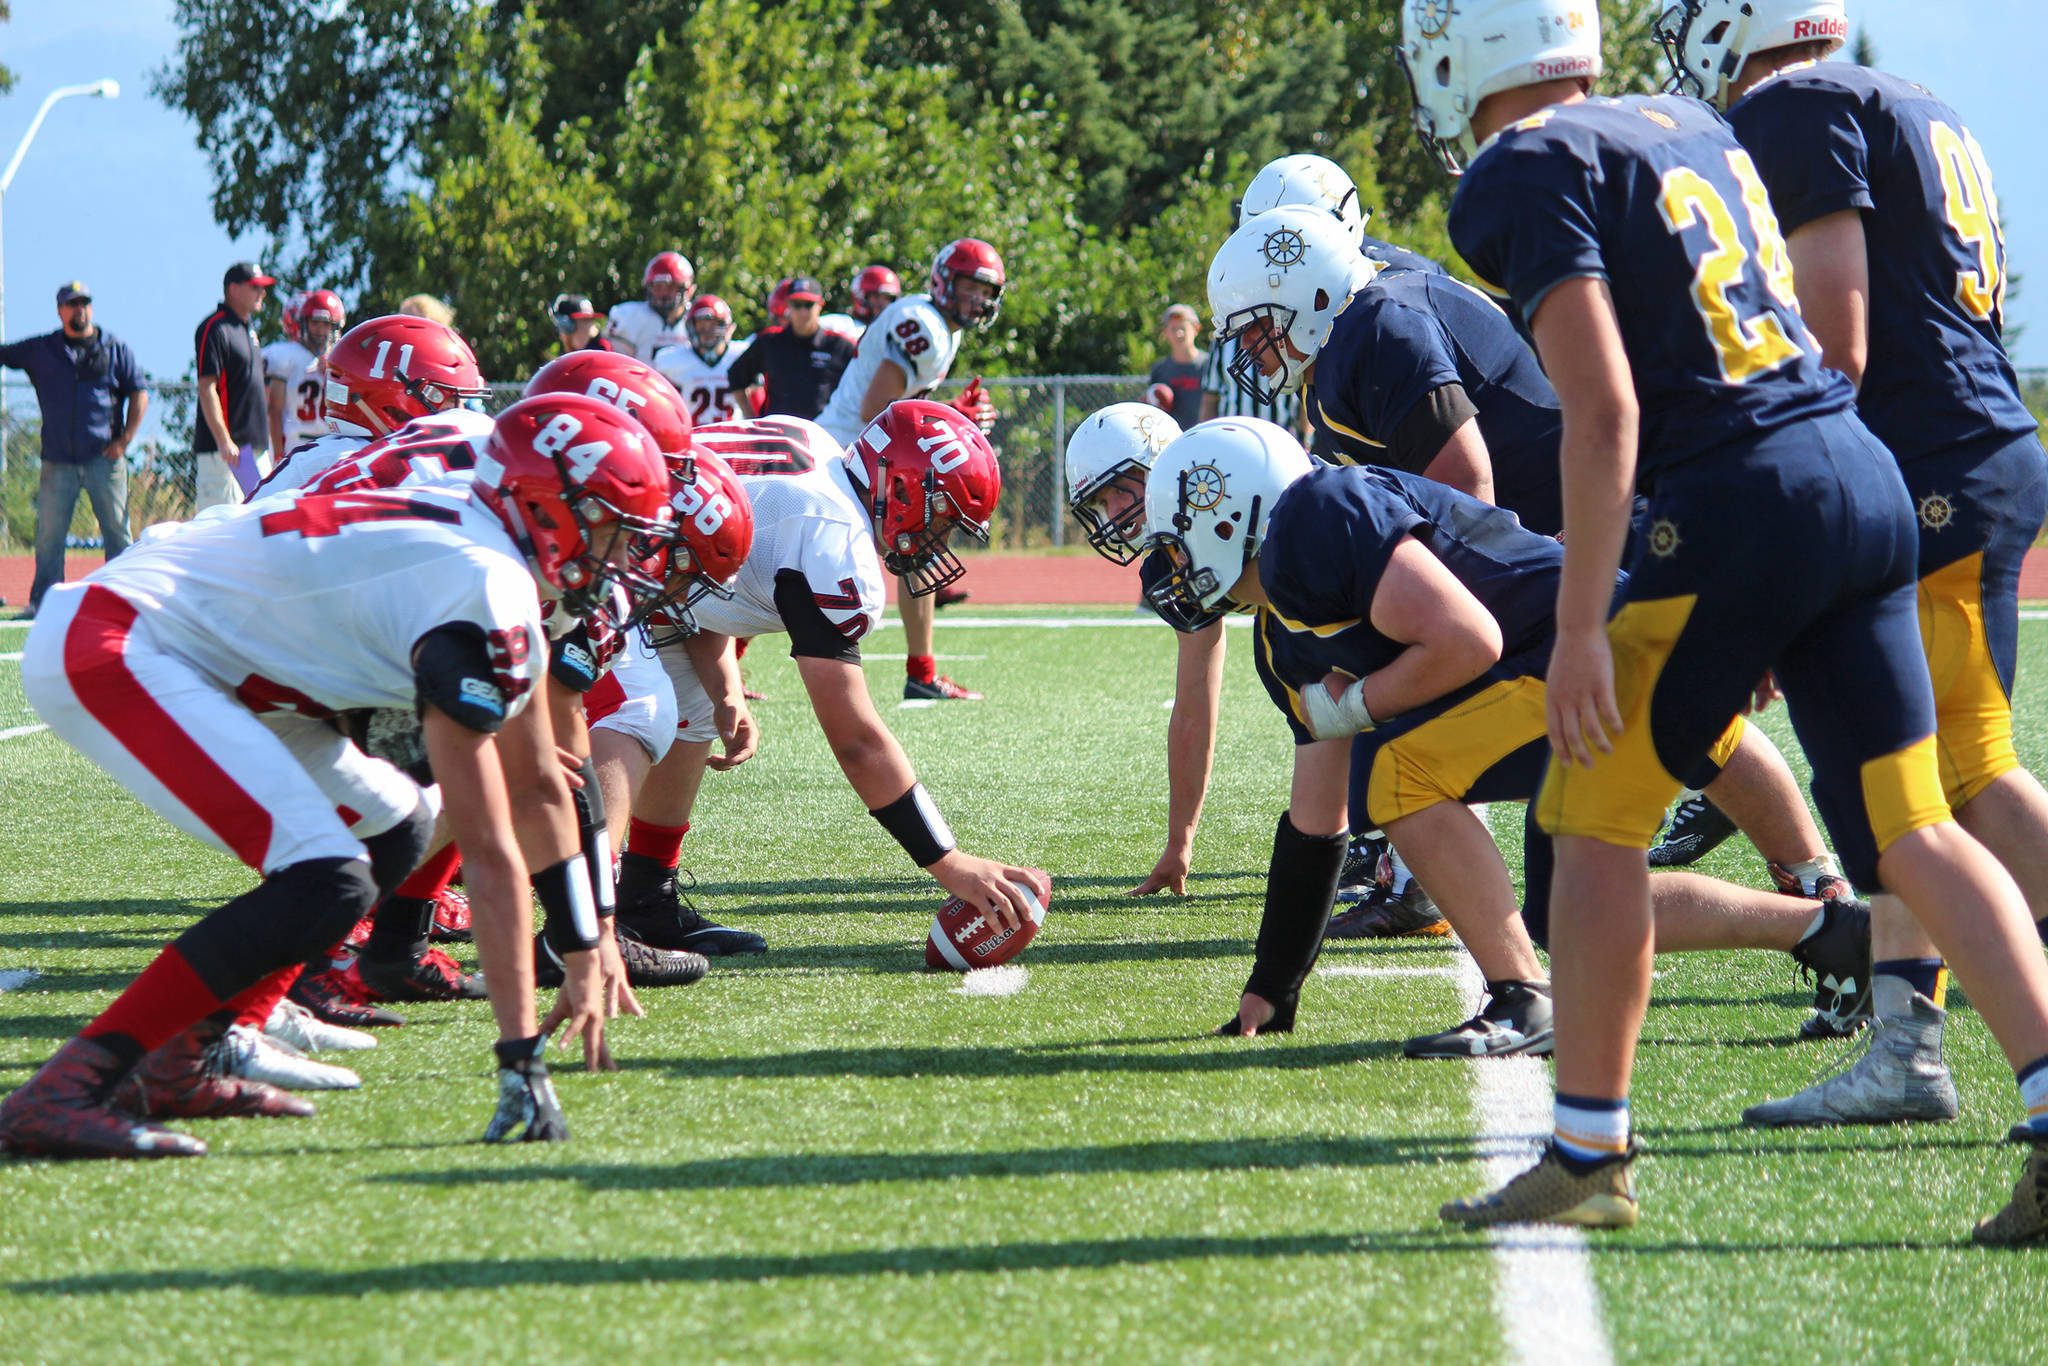 Photo by Megan Pacer/Homer News                                 The Kenai Kardinals (left) and Homer Mariners face off against each other in their first varsity football game on the season Saturday, Aug. 17, 2019 in Homer, Alaska.